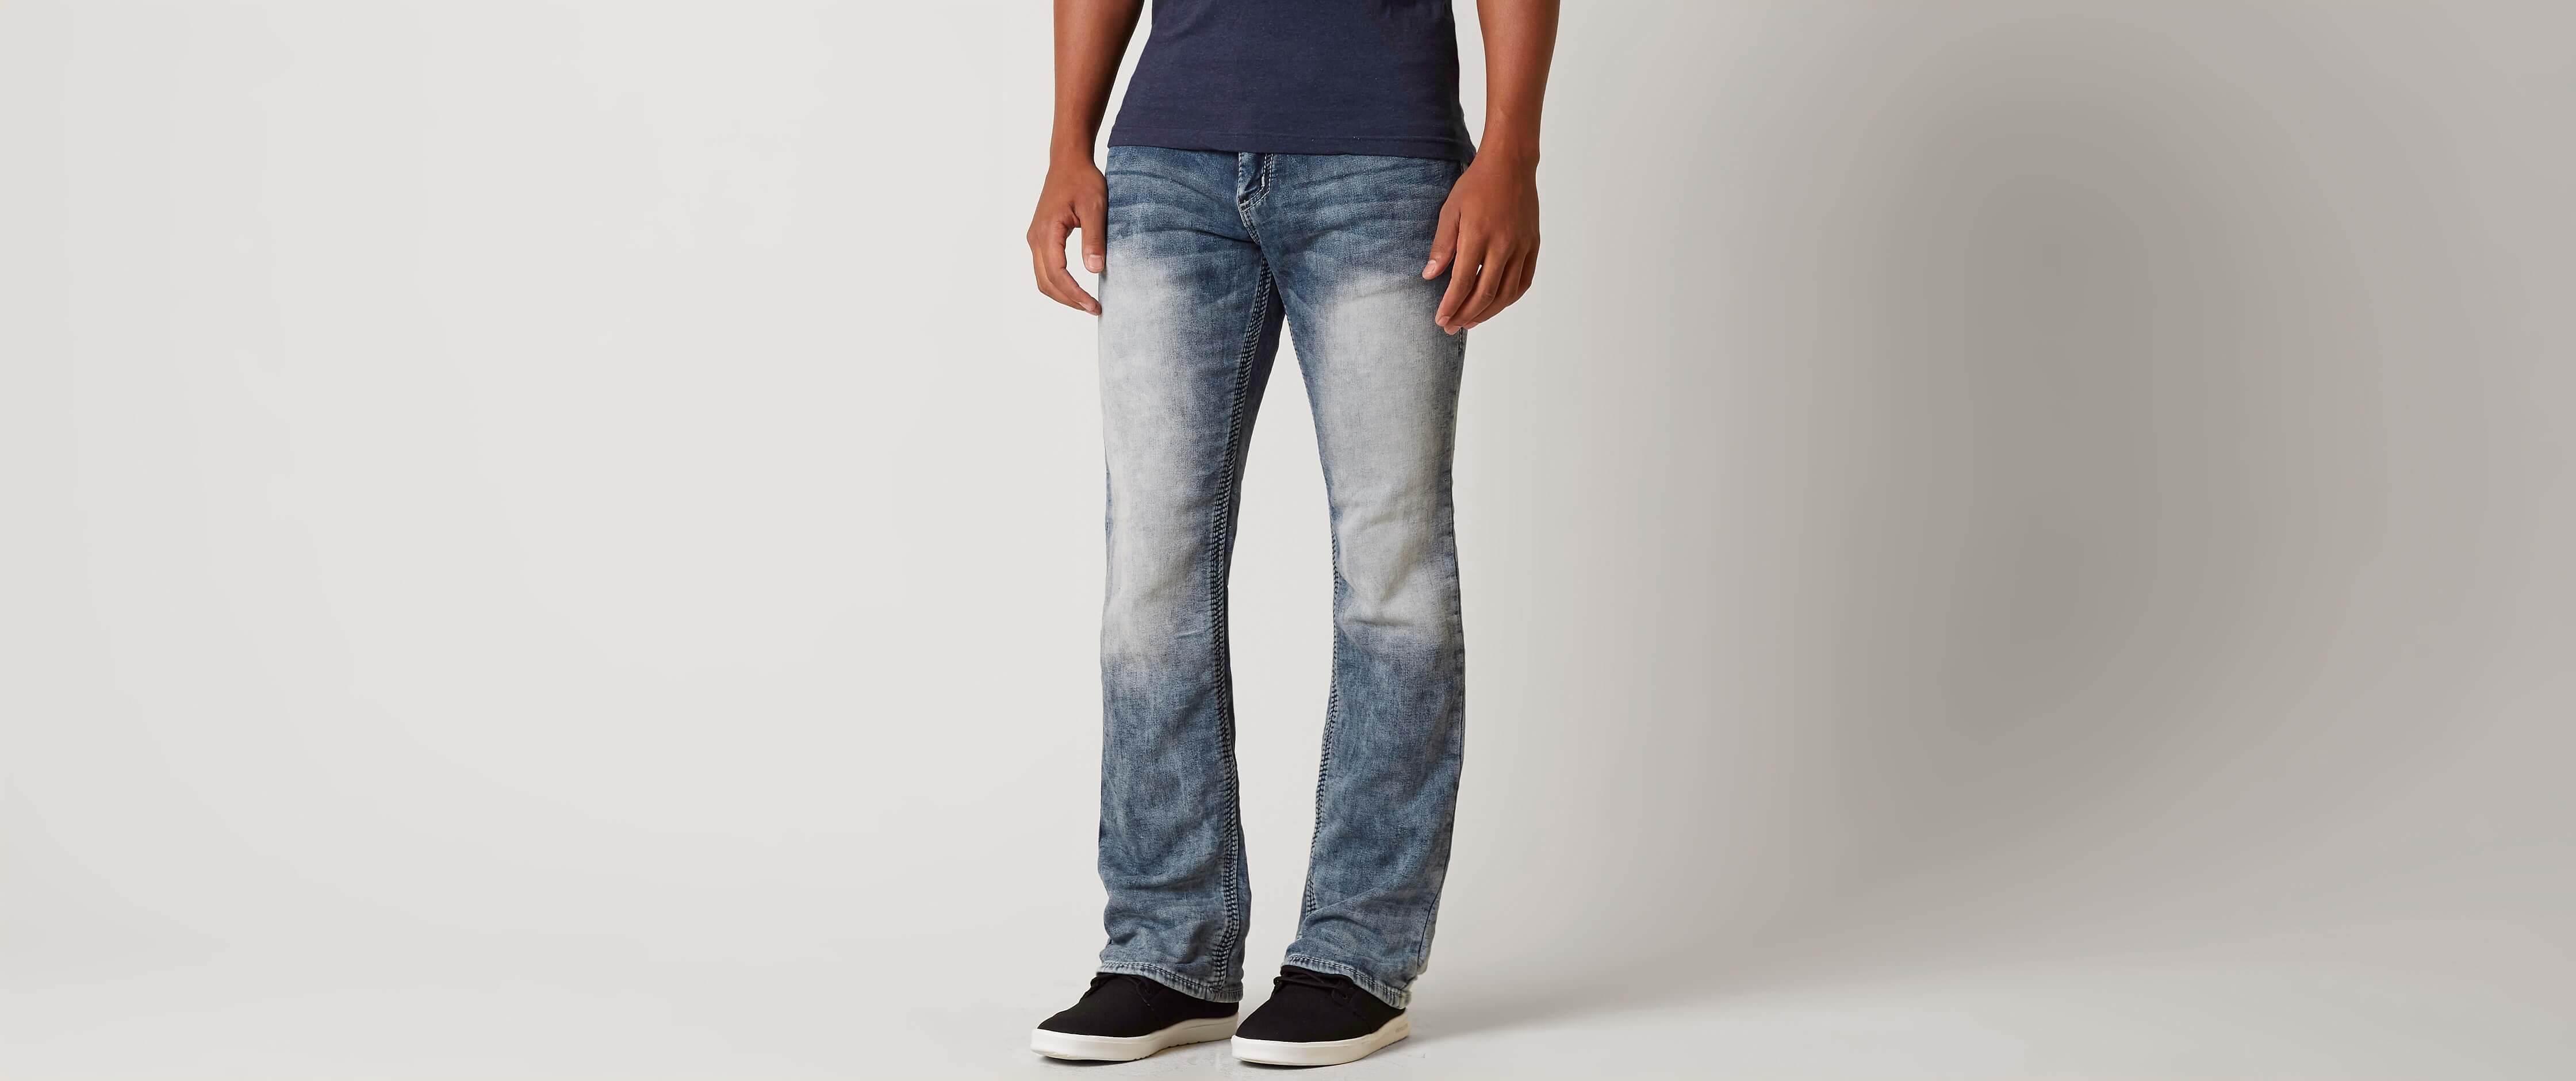 american fighter jeans bootcut